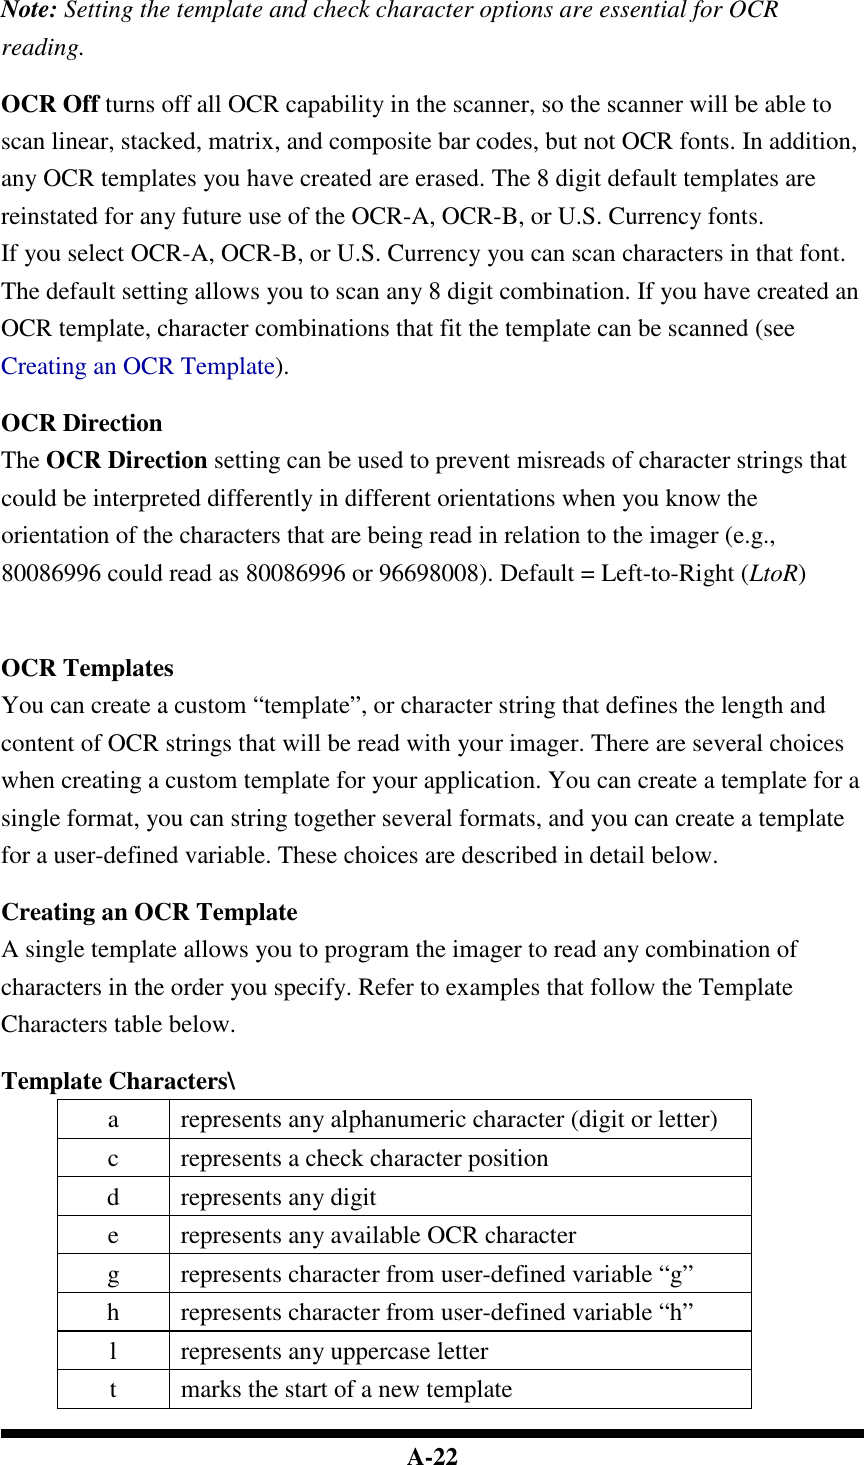  A-22  Note: Setting the template and check character options are essential for OCR reading.  OCR Off turns off all OCR capability in the scanner, so the scanner will be able to scan linear, stacked, matrix, and composite bar codes, but not OCR fonts. In addition, any OCR templates you have created are erased. The 8 digit default templates are reinstated for any future use of the OCR-A, OCR-B, or U.S. Currency fonts. If you select OCR-A, OCR-B, or U.S. Currency you can scan characters in that font. The default setting allows you to scan any 8 digit combination. If you have created an OCR template, character combinations that fit the template can be scanned (see Creating an OCR Template).  OCR Direction The OCR Direction setting can be used to prevent misreads of character strings that could be interpreted differently in different orientations when you know the orientation of the characters that are being read in relation to the imager (e.g., 80086996 could read as 80086996 or 96698008). Default = Left-to-Right (LtoR)    OCR Templates You can create a custom “template”, or character string that defines the length and content of OCR strings that will be read with your imager. There are several choices when creating a custom template for your application. You can create a template for a single format, you can string together several formats, and you can create a template for a user-defined variable. These choices are described in detail below.  Creating an OCR Template A single template allows you to program the imager to read any combination of characters in the order you specify. Refer to examples that follow the Template Characters table below.  Template Characters\ a  represents any alphanumeric character (digit or letter) c  represents a check character position d  represents any digit e  represents any available OCR character g  represents character from user-defined variable “g” h  represents character from user-defined variable “h” l  represents any uppercase letter t  marks the start of a new template 